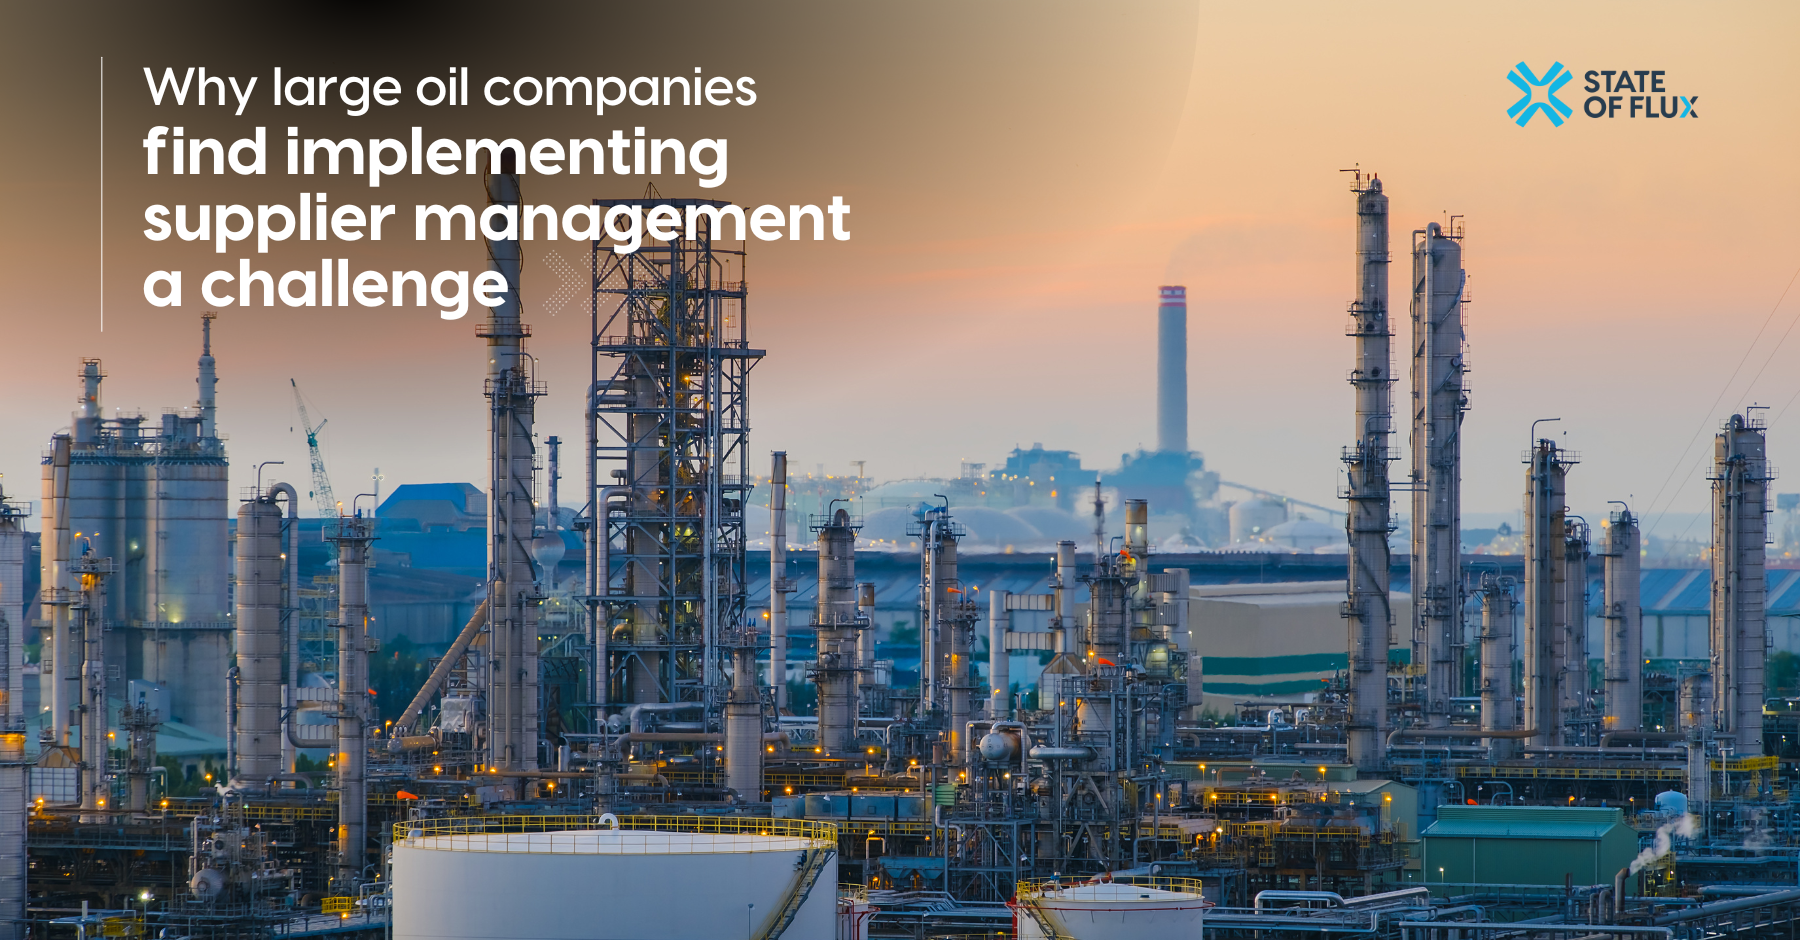 Why large oil companies find implementing supplier management a challenge